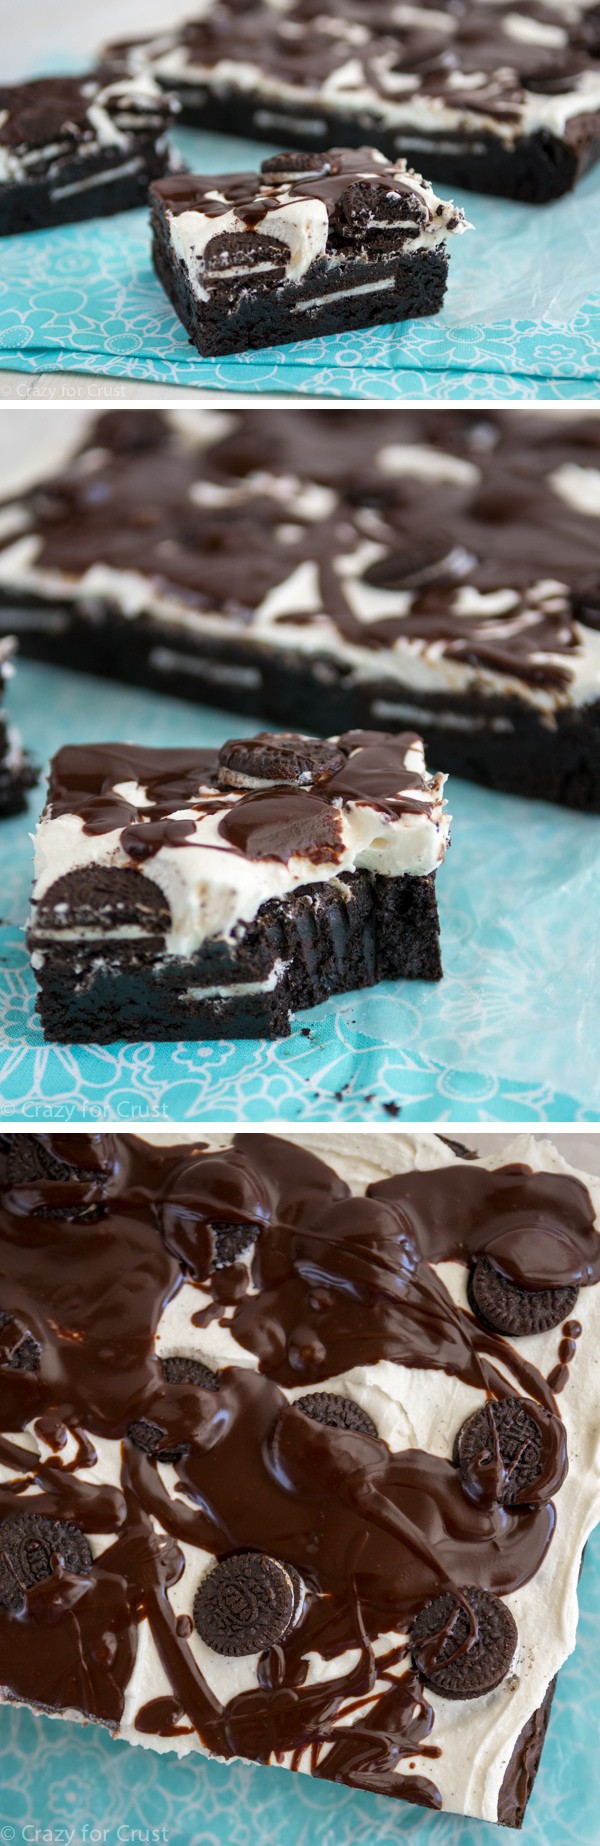 Cookies 'n Cream Extreme Brownies filled with Oreos and topped with fluffy white frosting! From Extreme Brownies: 50 Recipes for the Most Over-the-Top Treats Ever by Connie Weis/Andrews McMeel Publishing, 2014